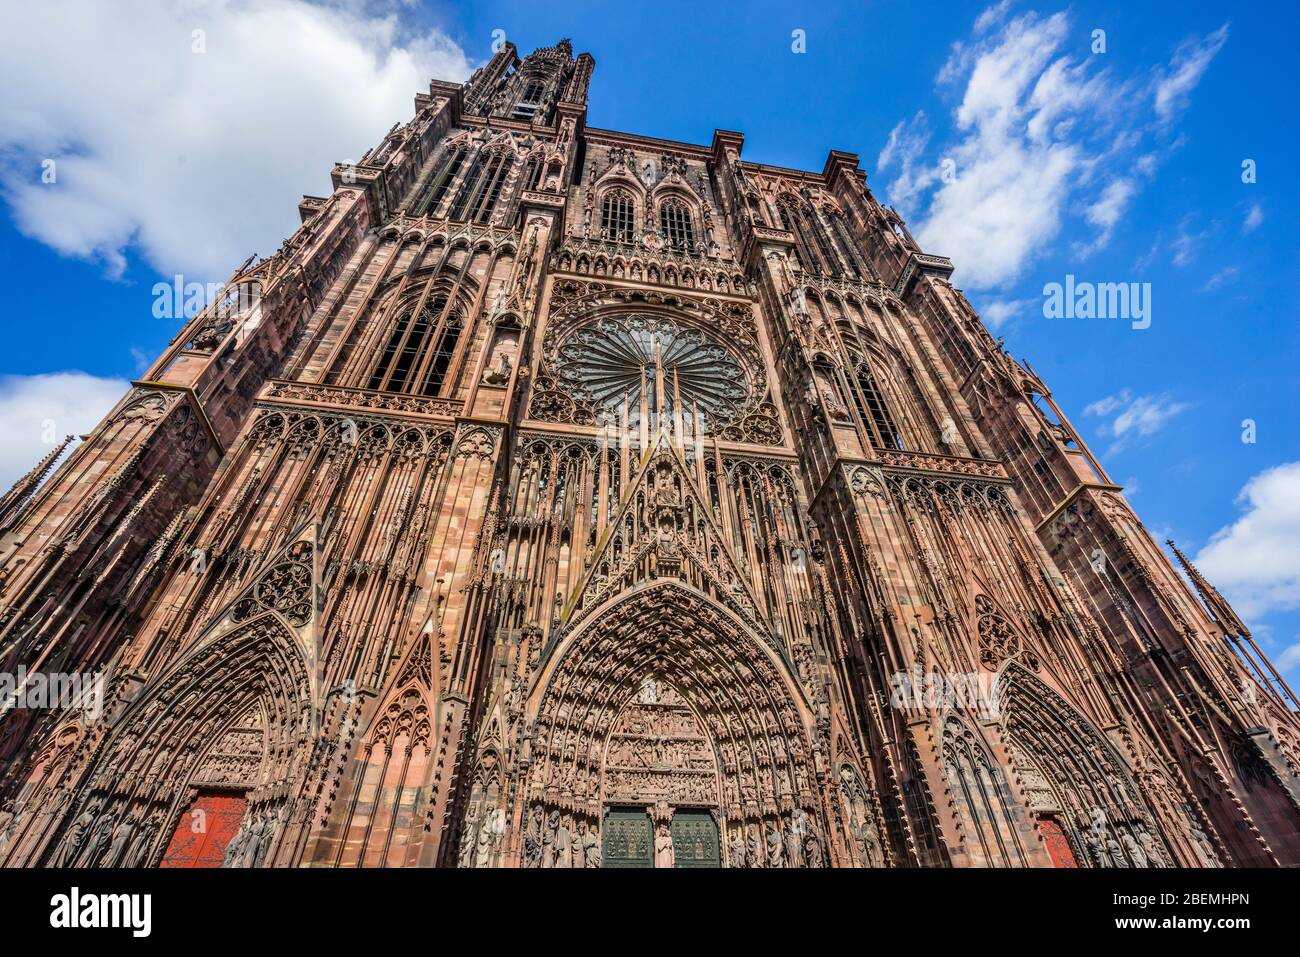 view of Strasbourg Cathedral's west façade from Place de la Cathédrale, Strasbourg, Alsace, France Stock Photo